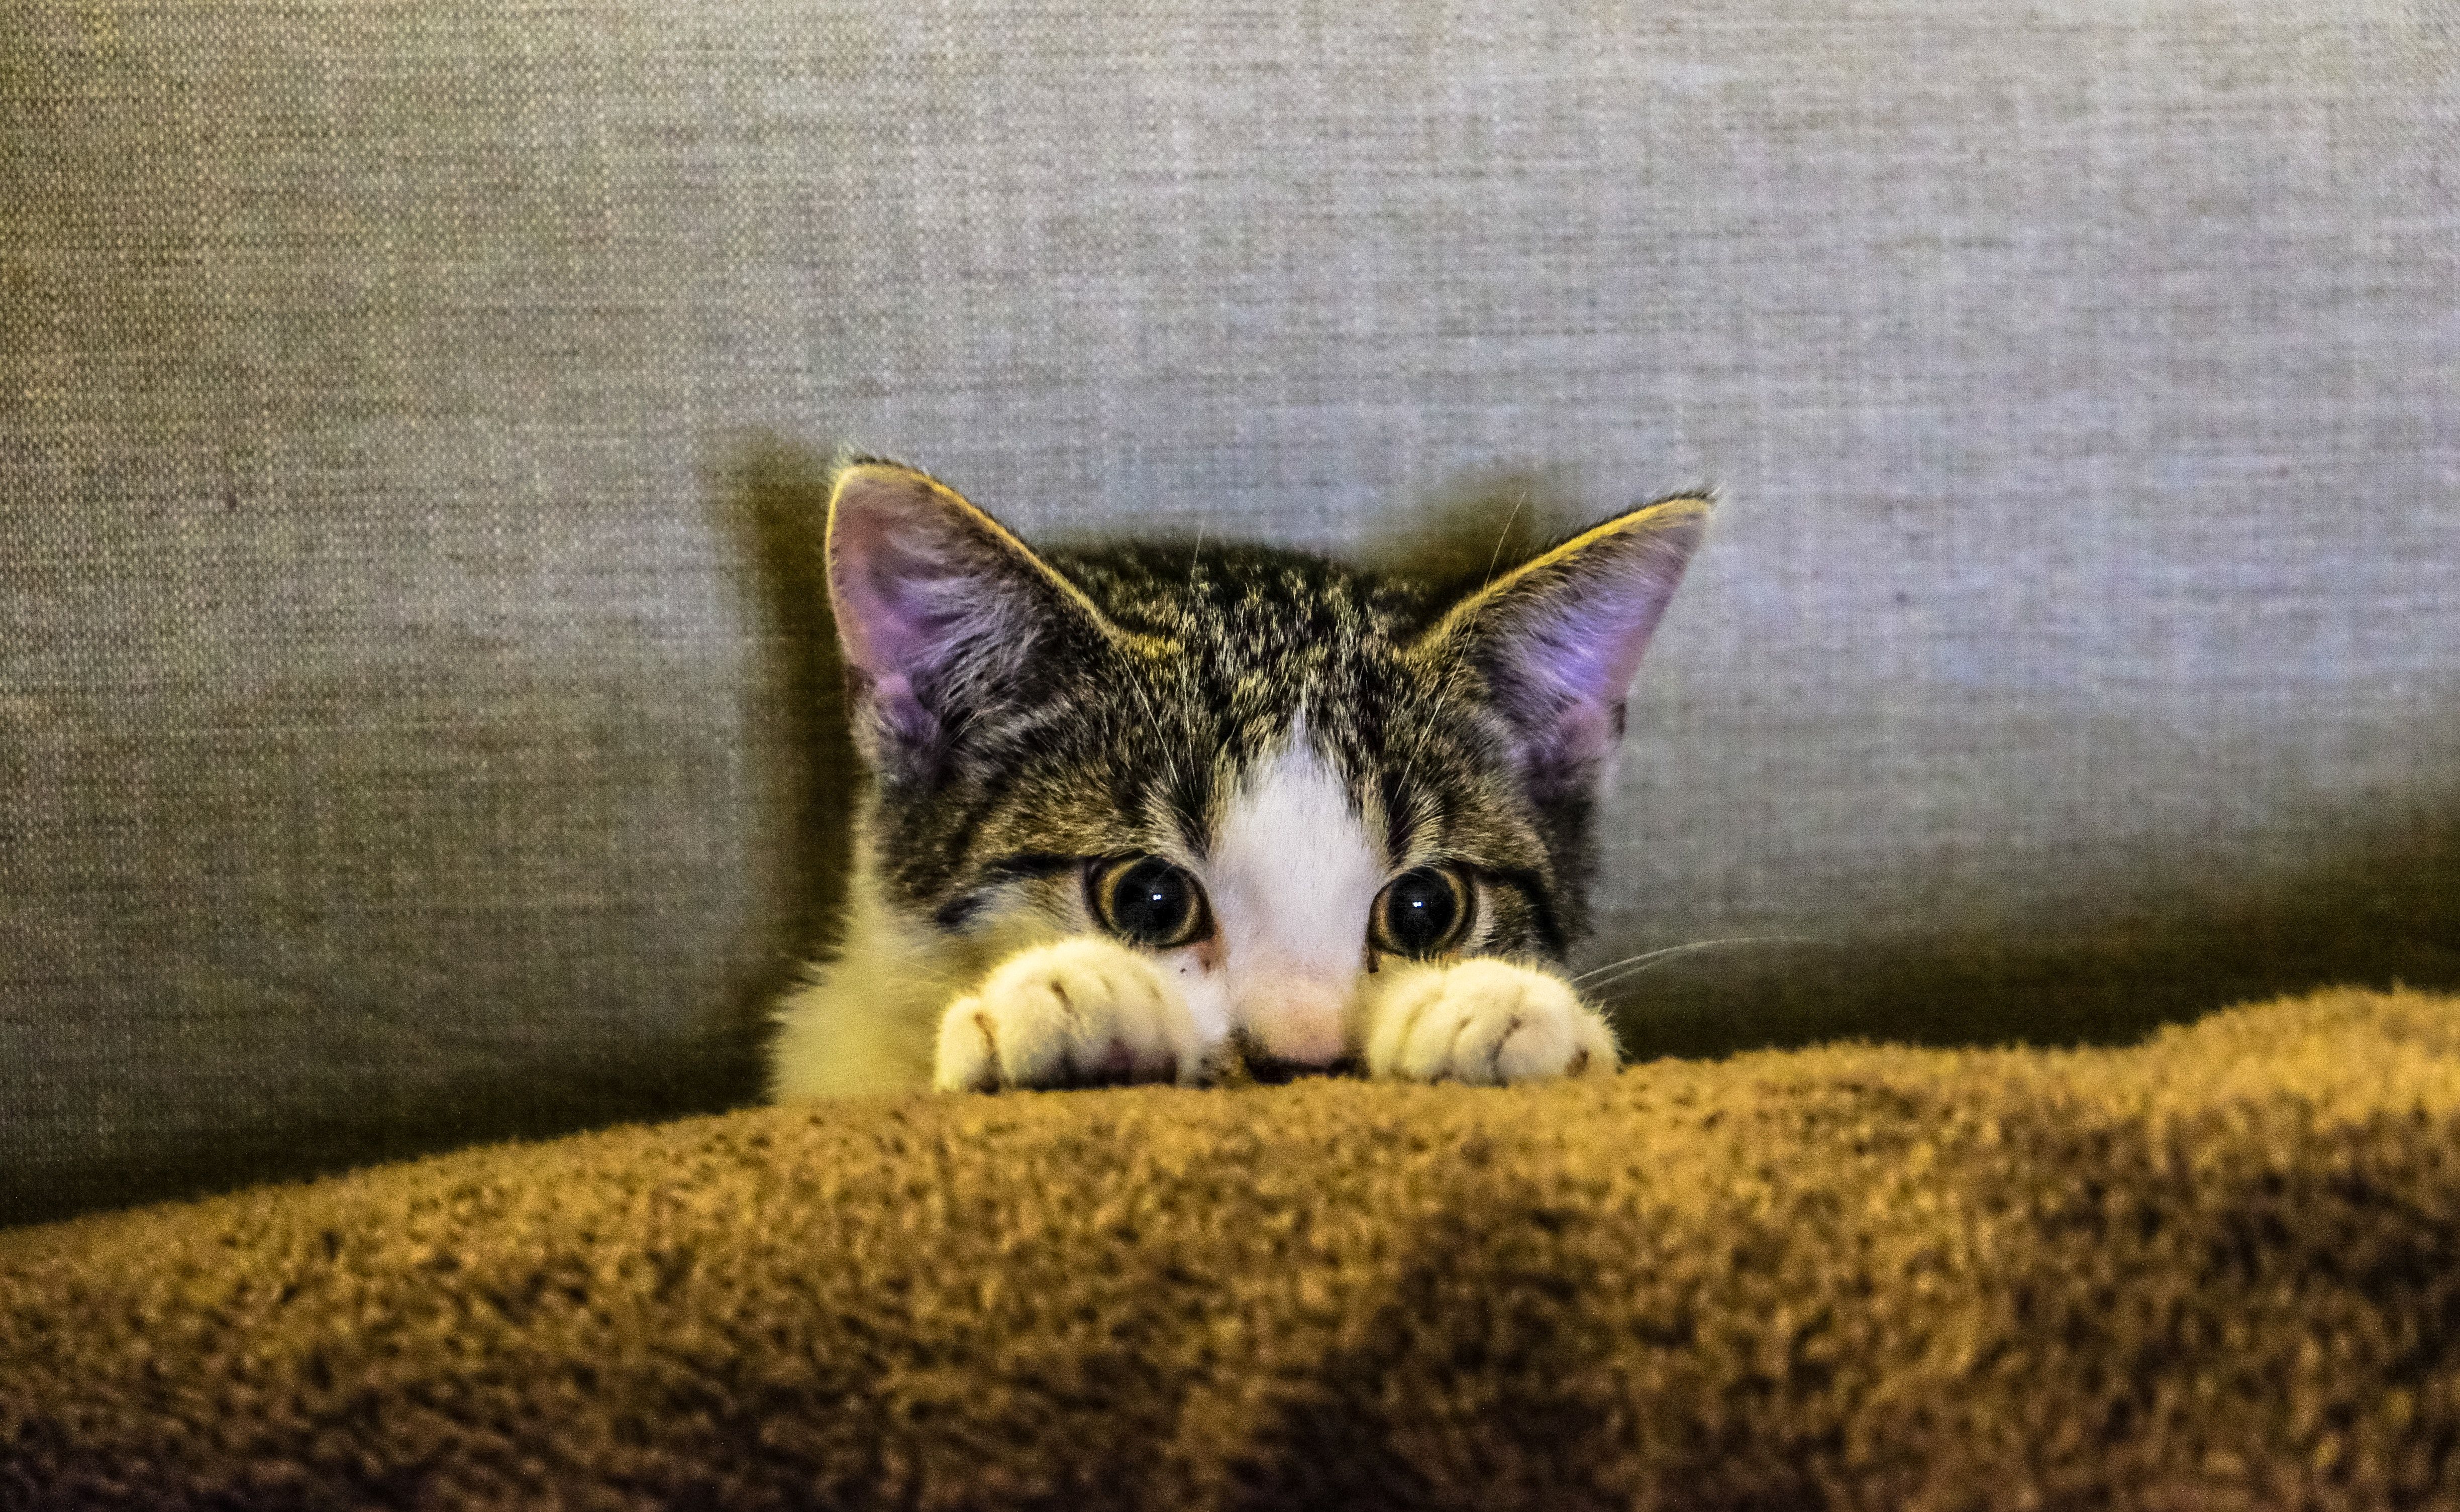 A kitten peeking out from behind the cushion - Cat